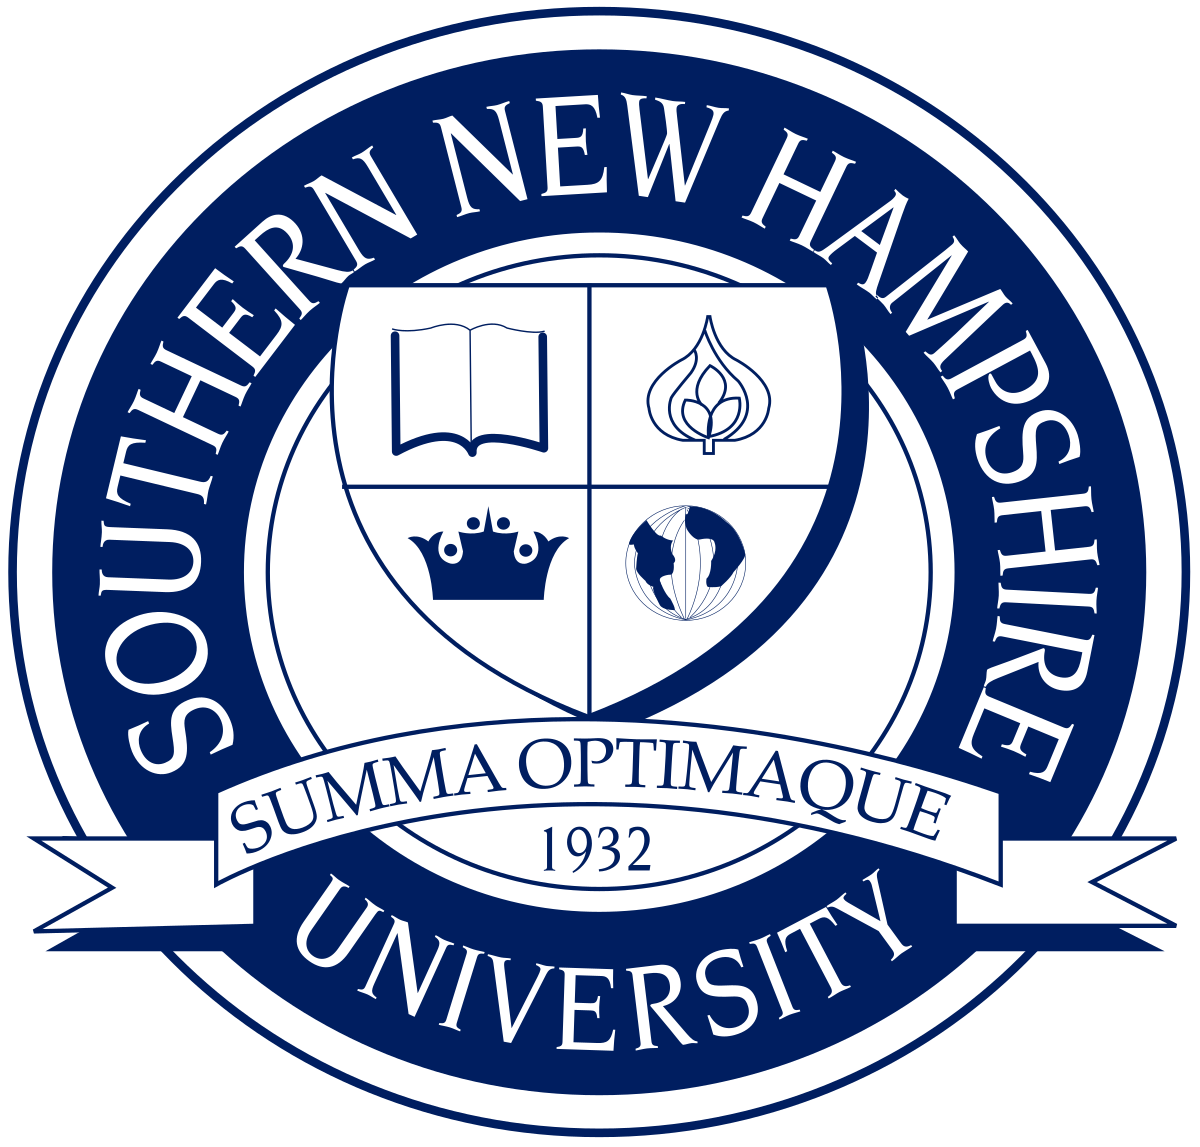 Logo of Southern New Hampshire University for our school profile